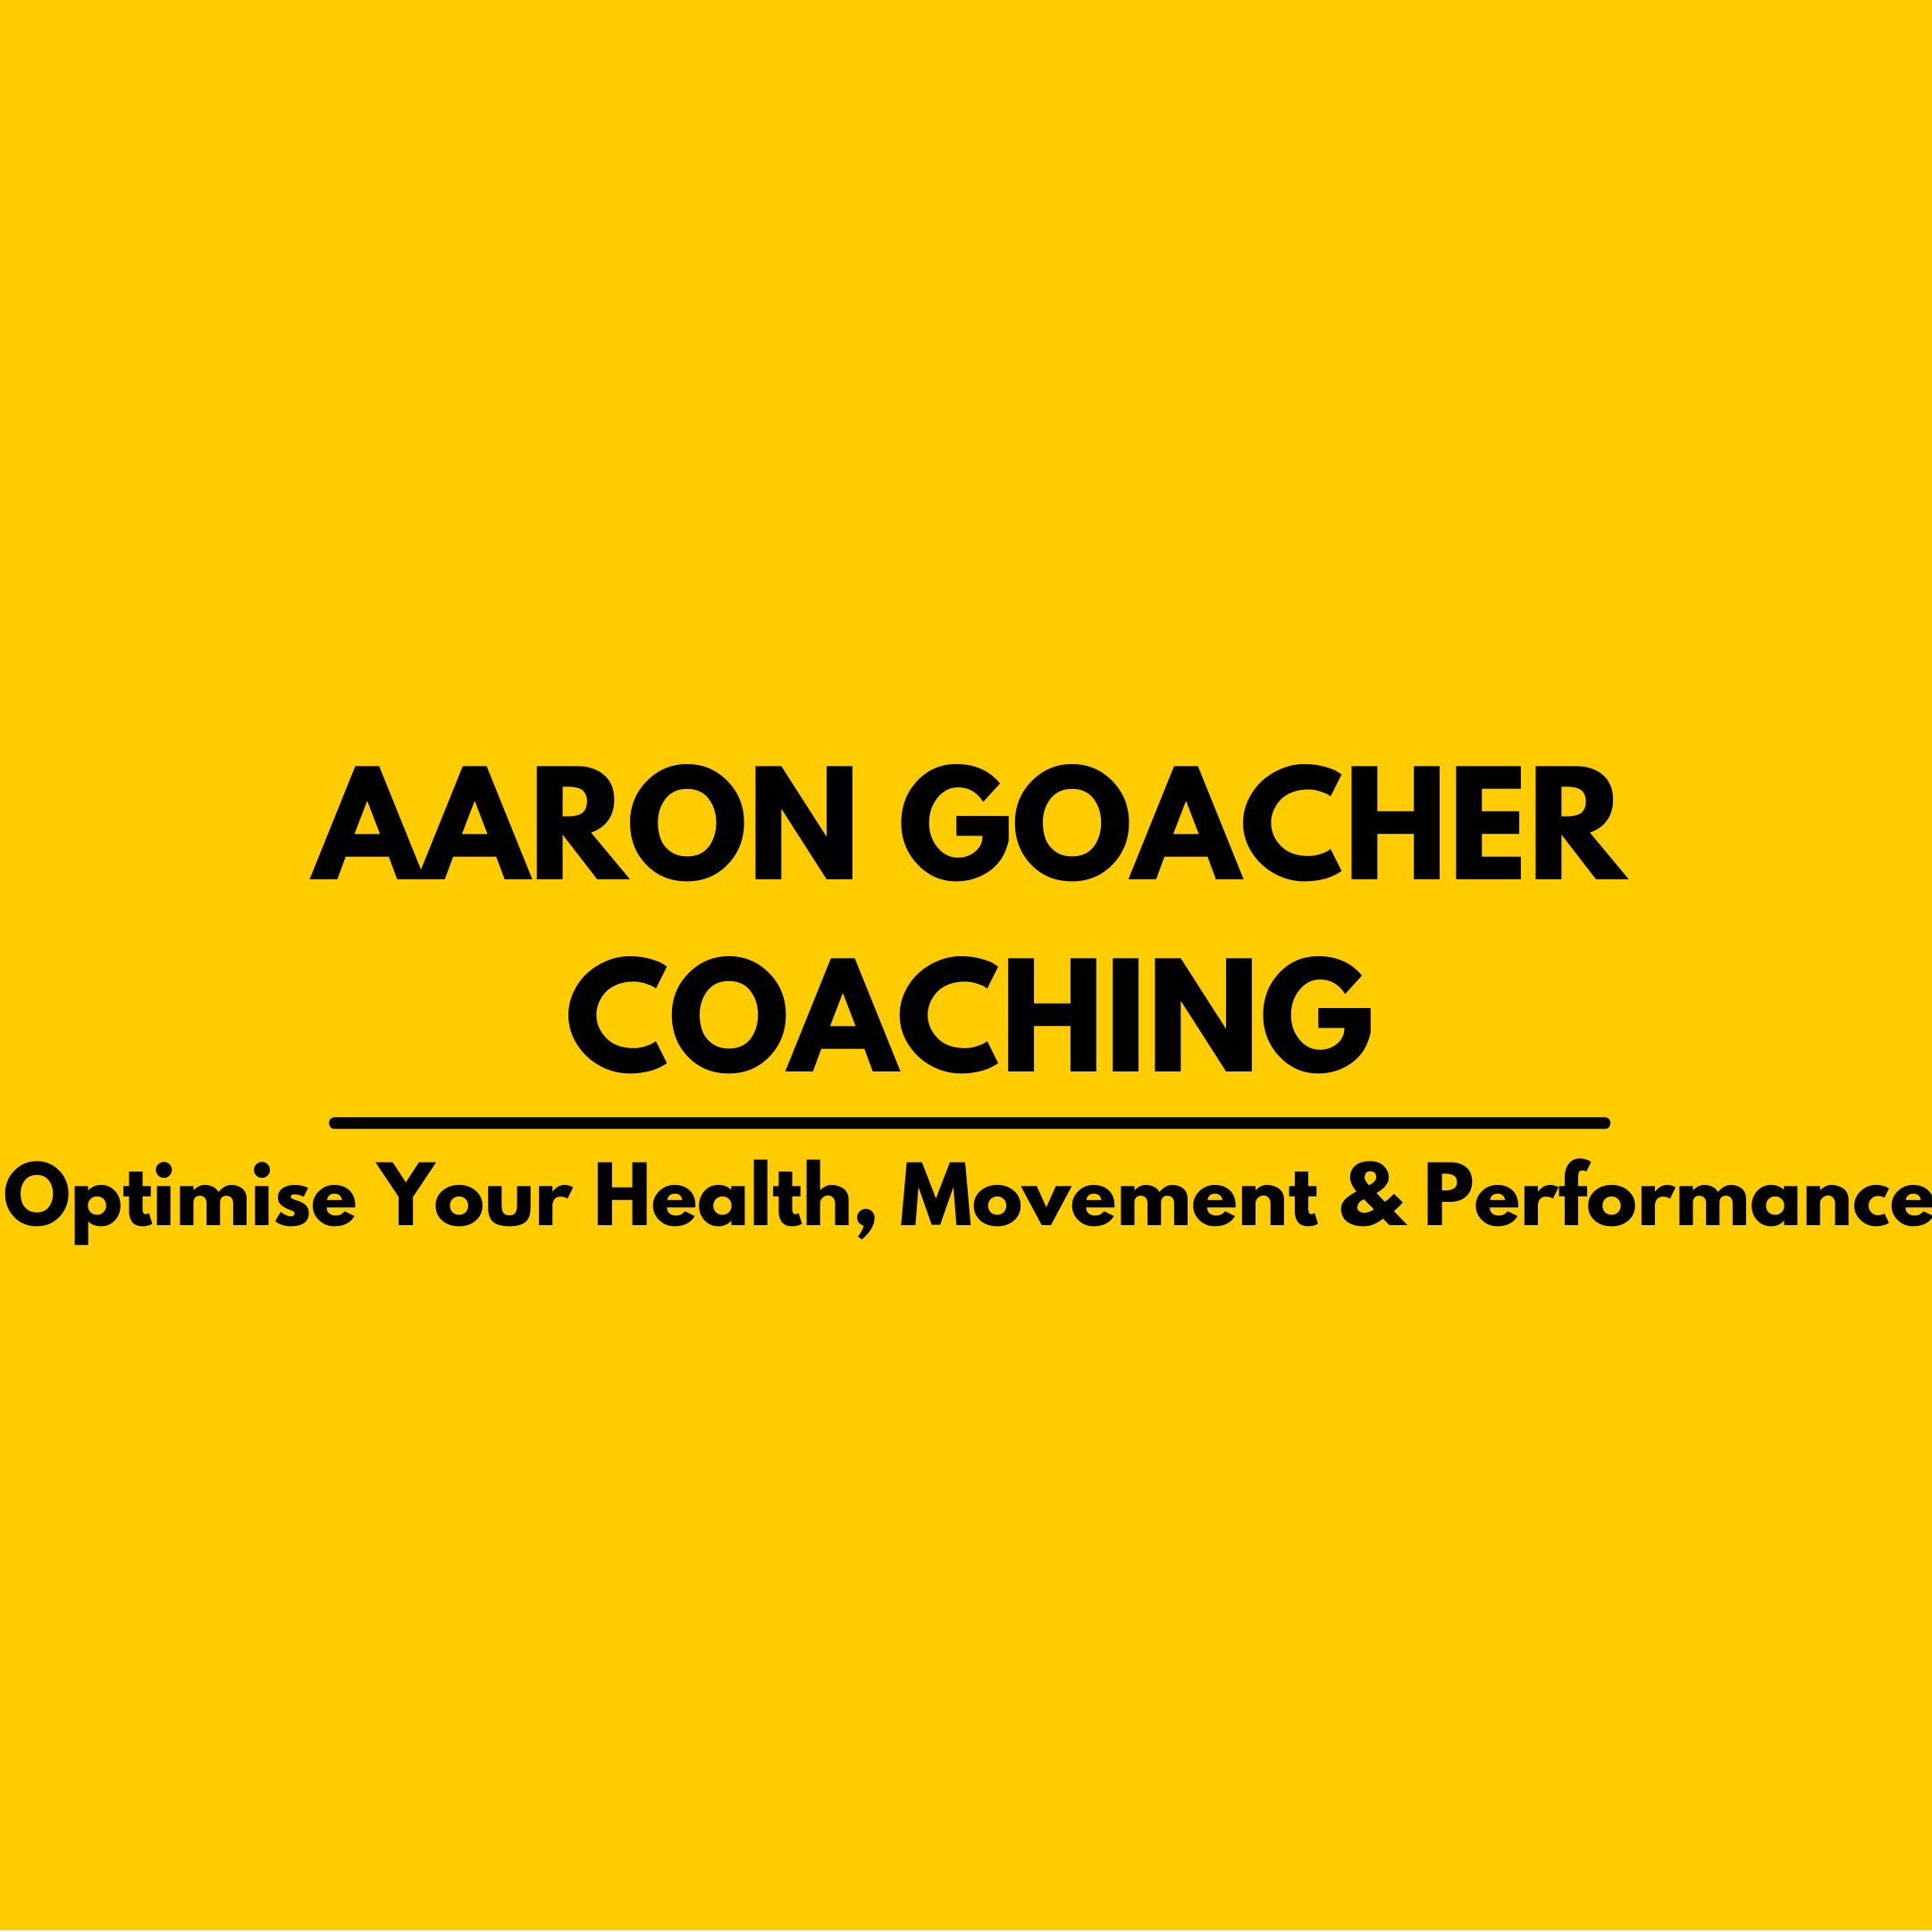 About: Aaron Goacher